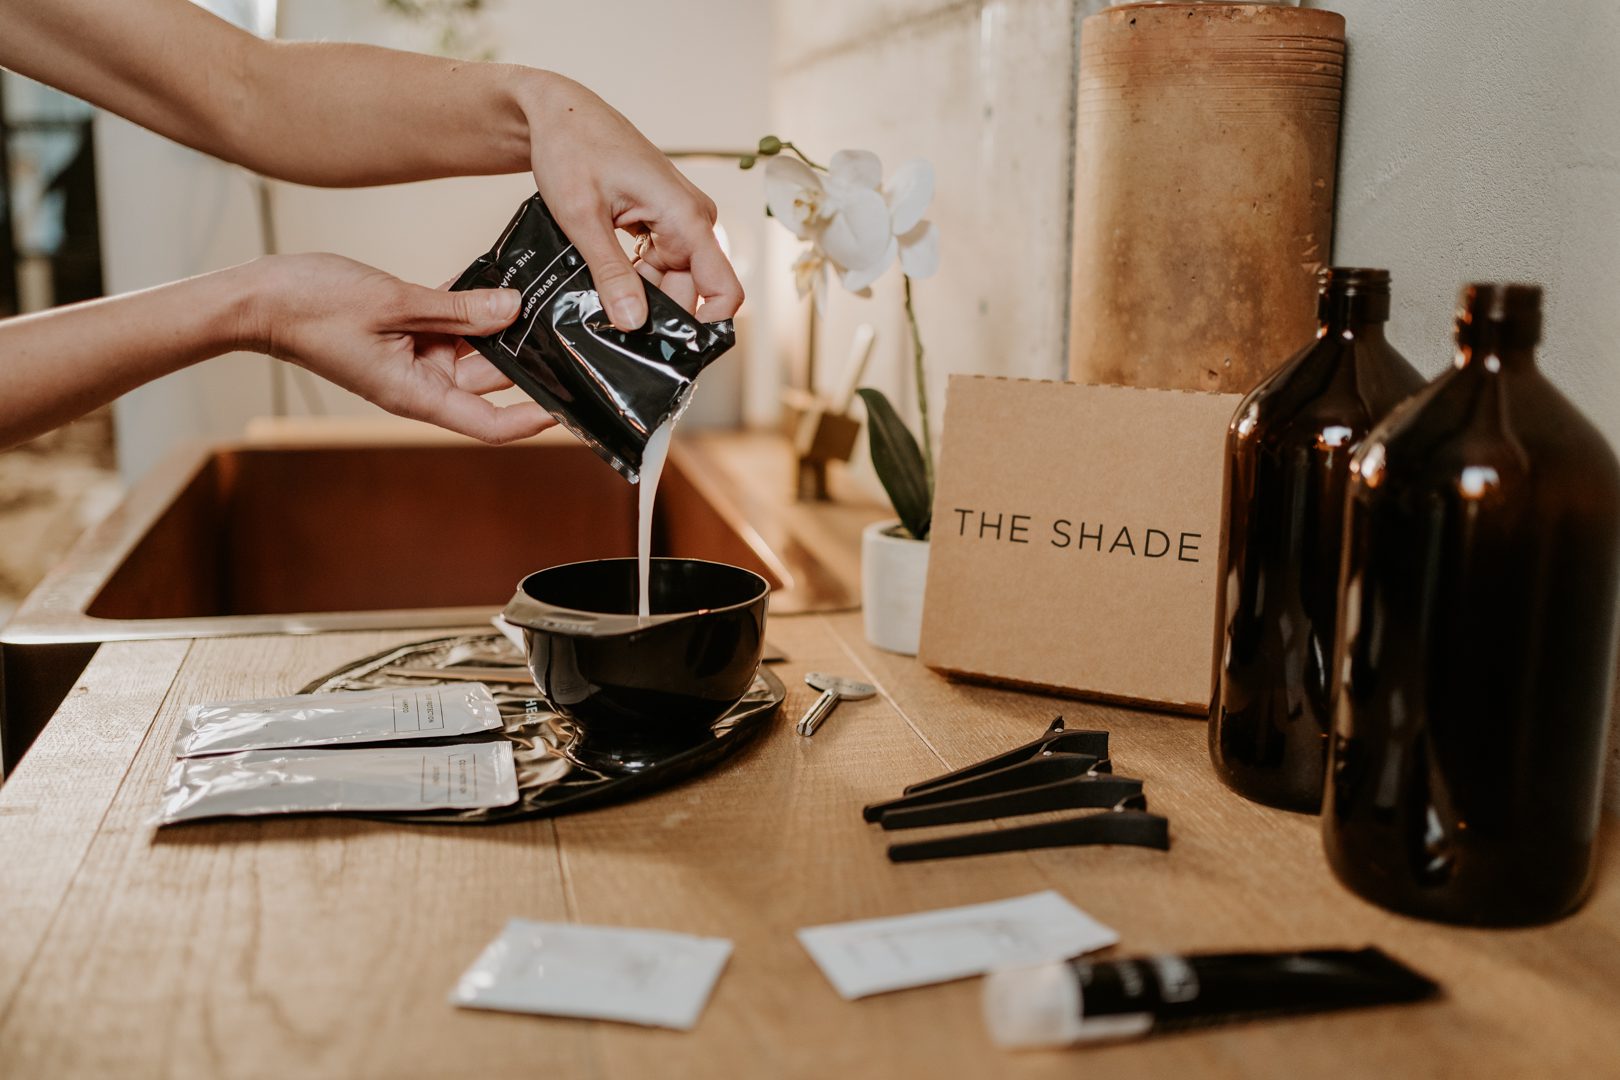 The Shade was established as a convenient and cost-effective alternative to salon visits and supermarket hair dye boxes, which often contain outdated ingredients.